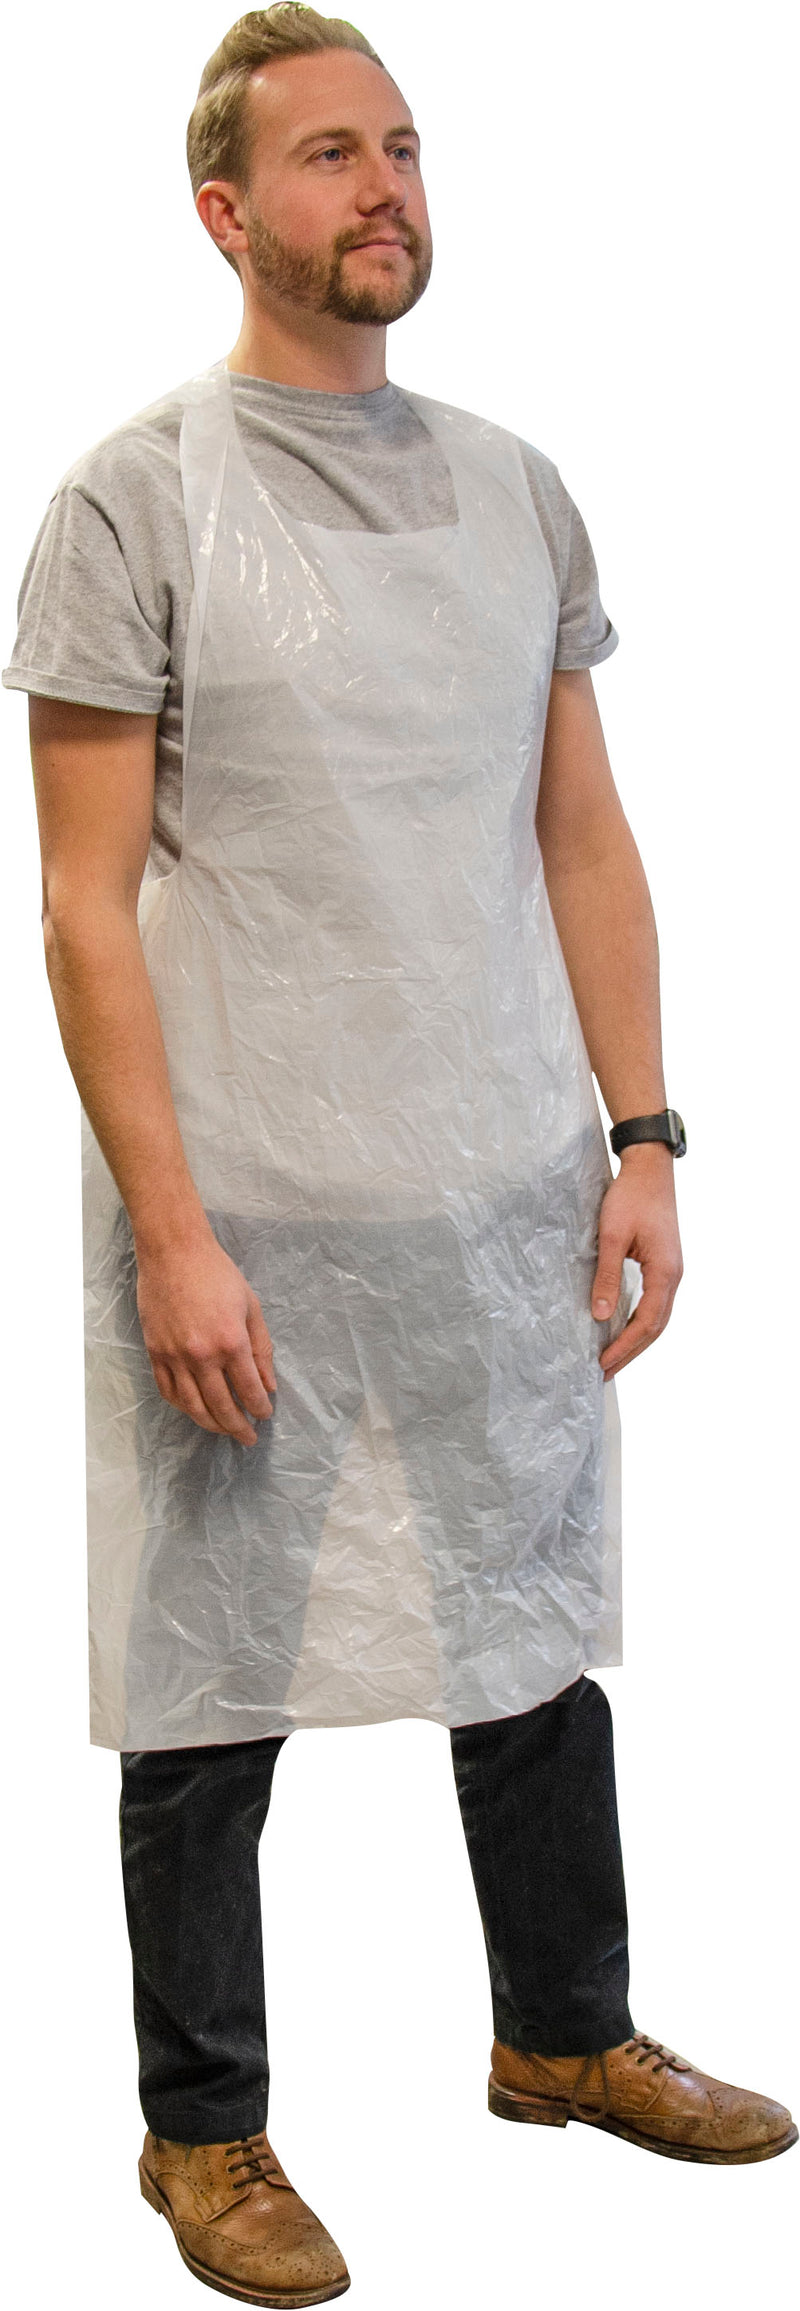 Disposable Apron White - 100 Pack